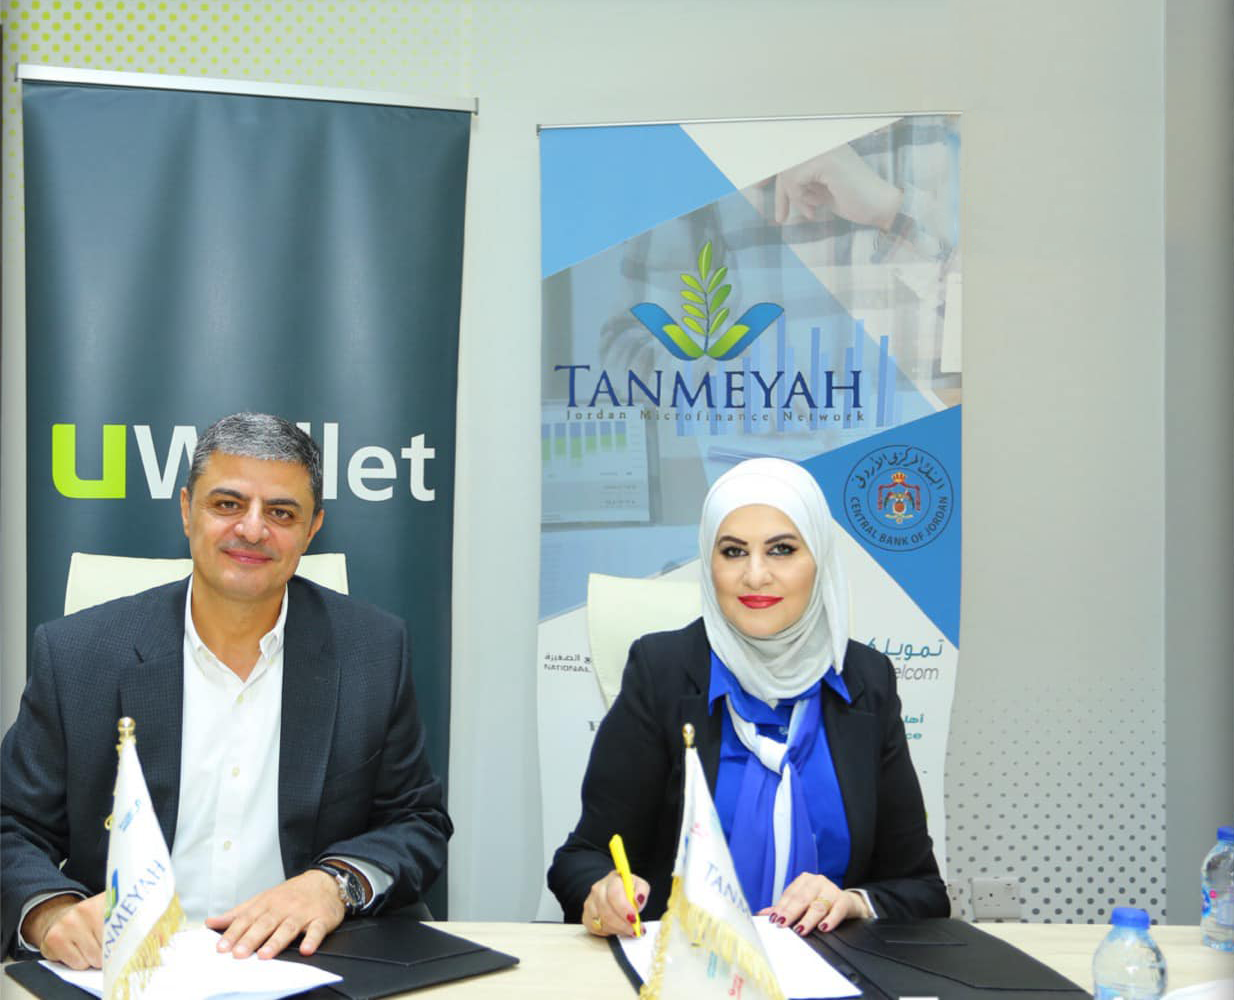 UWallet Partners With Tanmeyah to Promote Financial and Digital Inclusion in Remote Areas